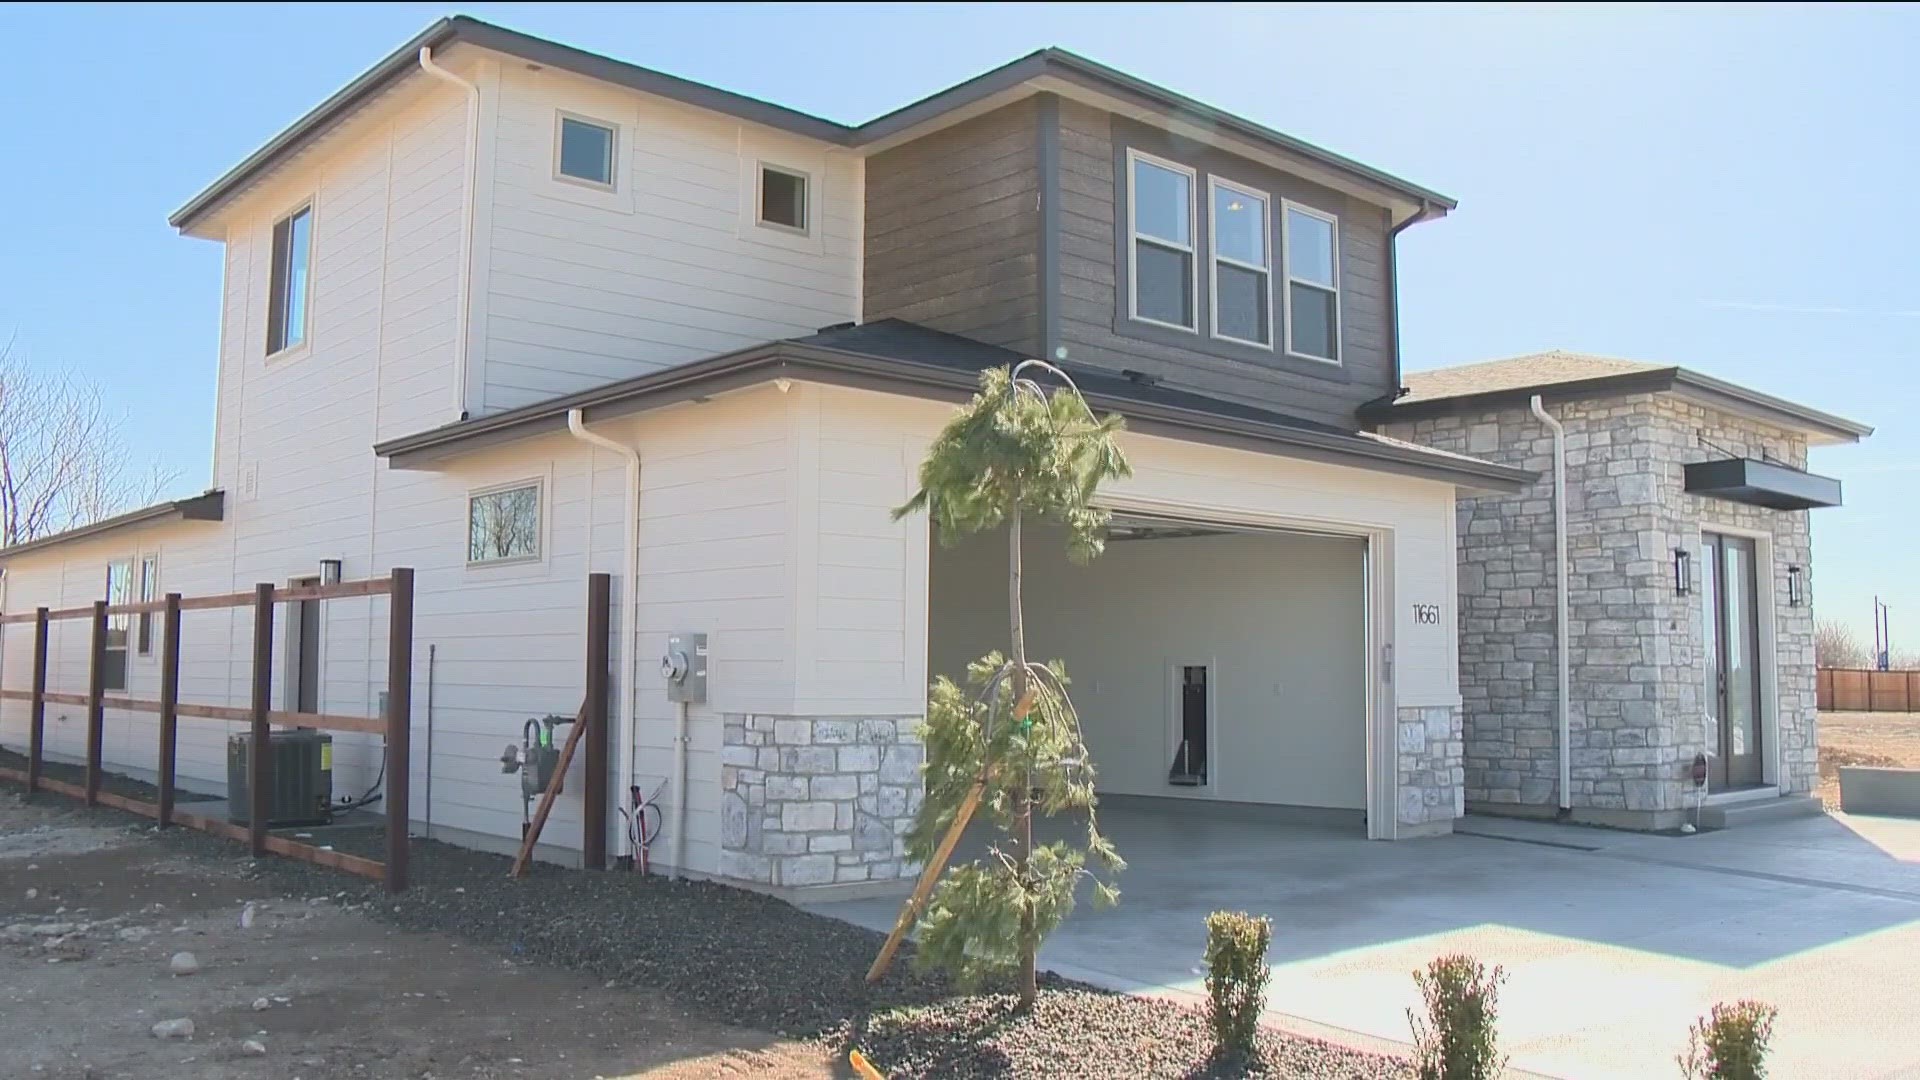 The St. Jude Dream Home is worth $750k, but the home is built at zero cost to the hospital. Berkeley Building Company says all the costs are donated.